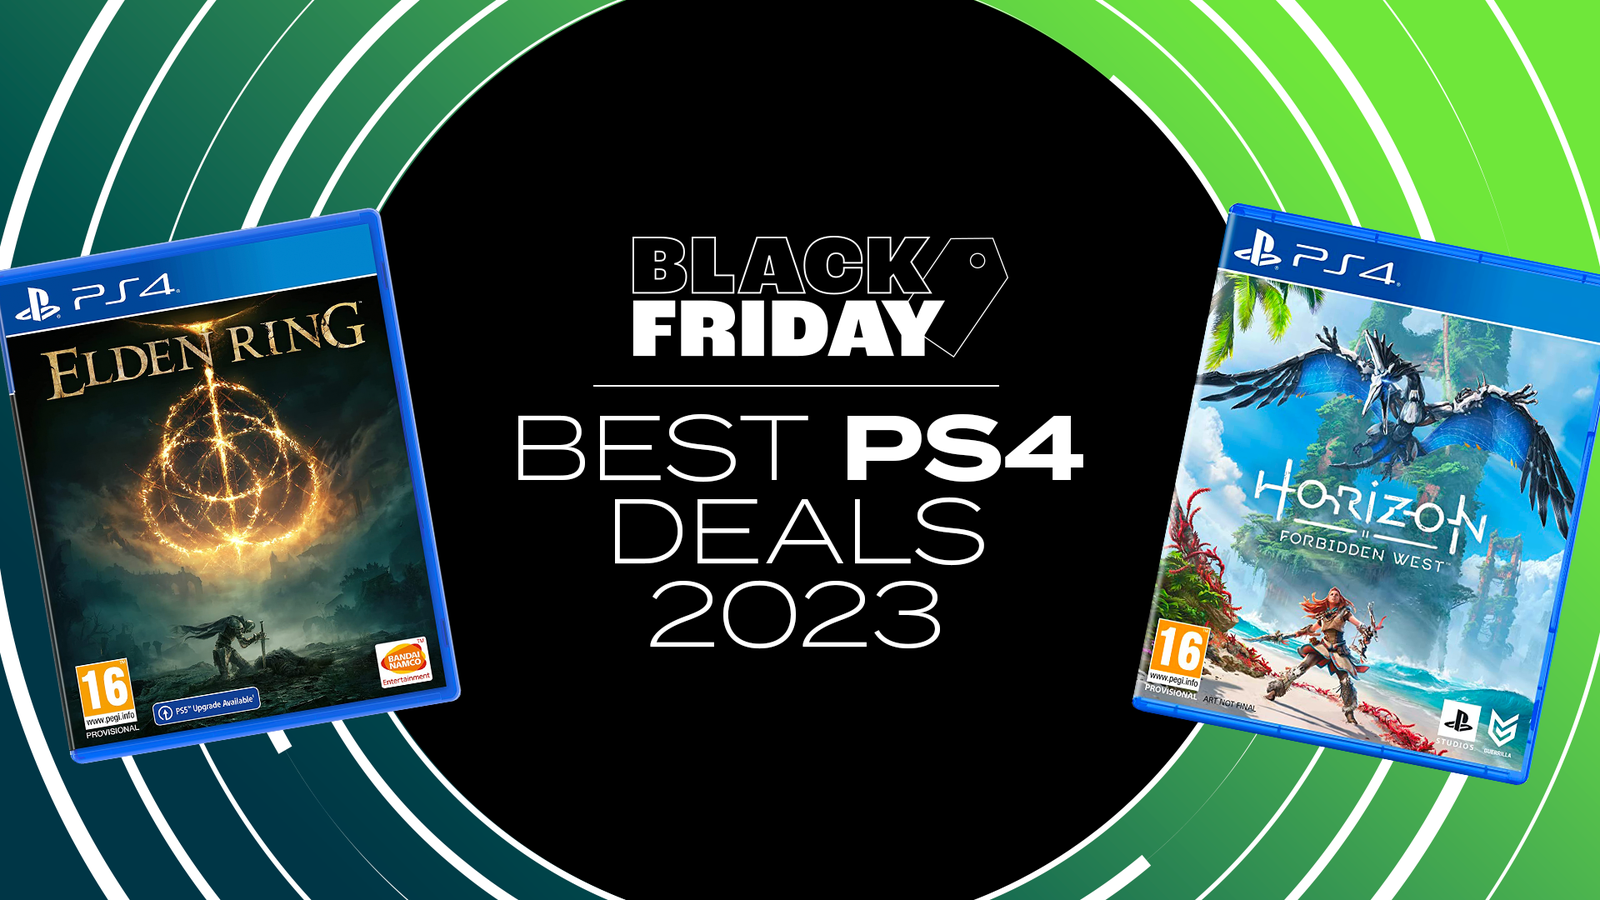 PS5 Black Friday Deals: Here are the best sales you can score on